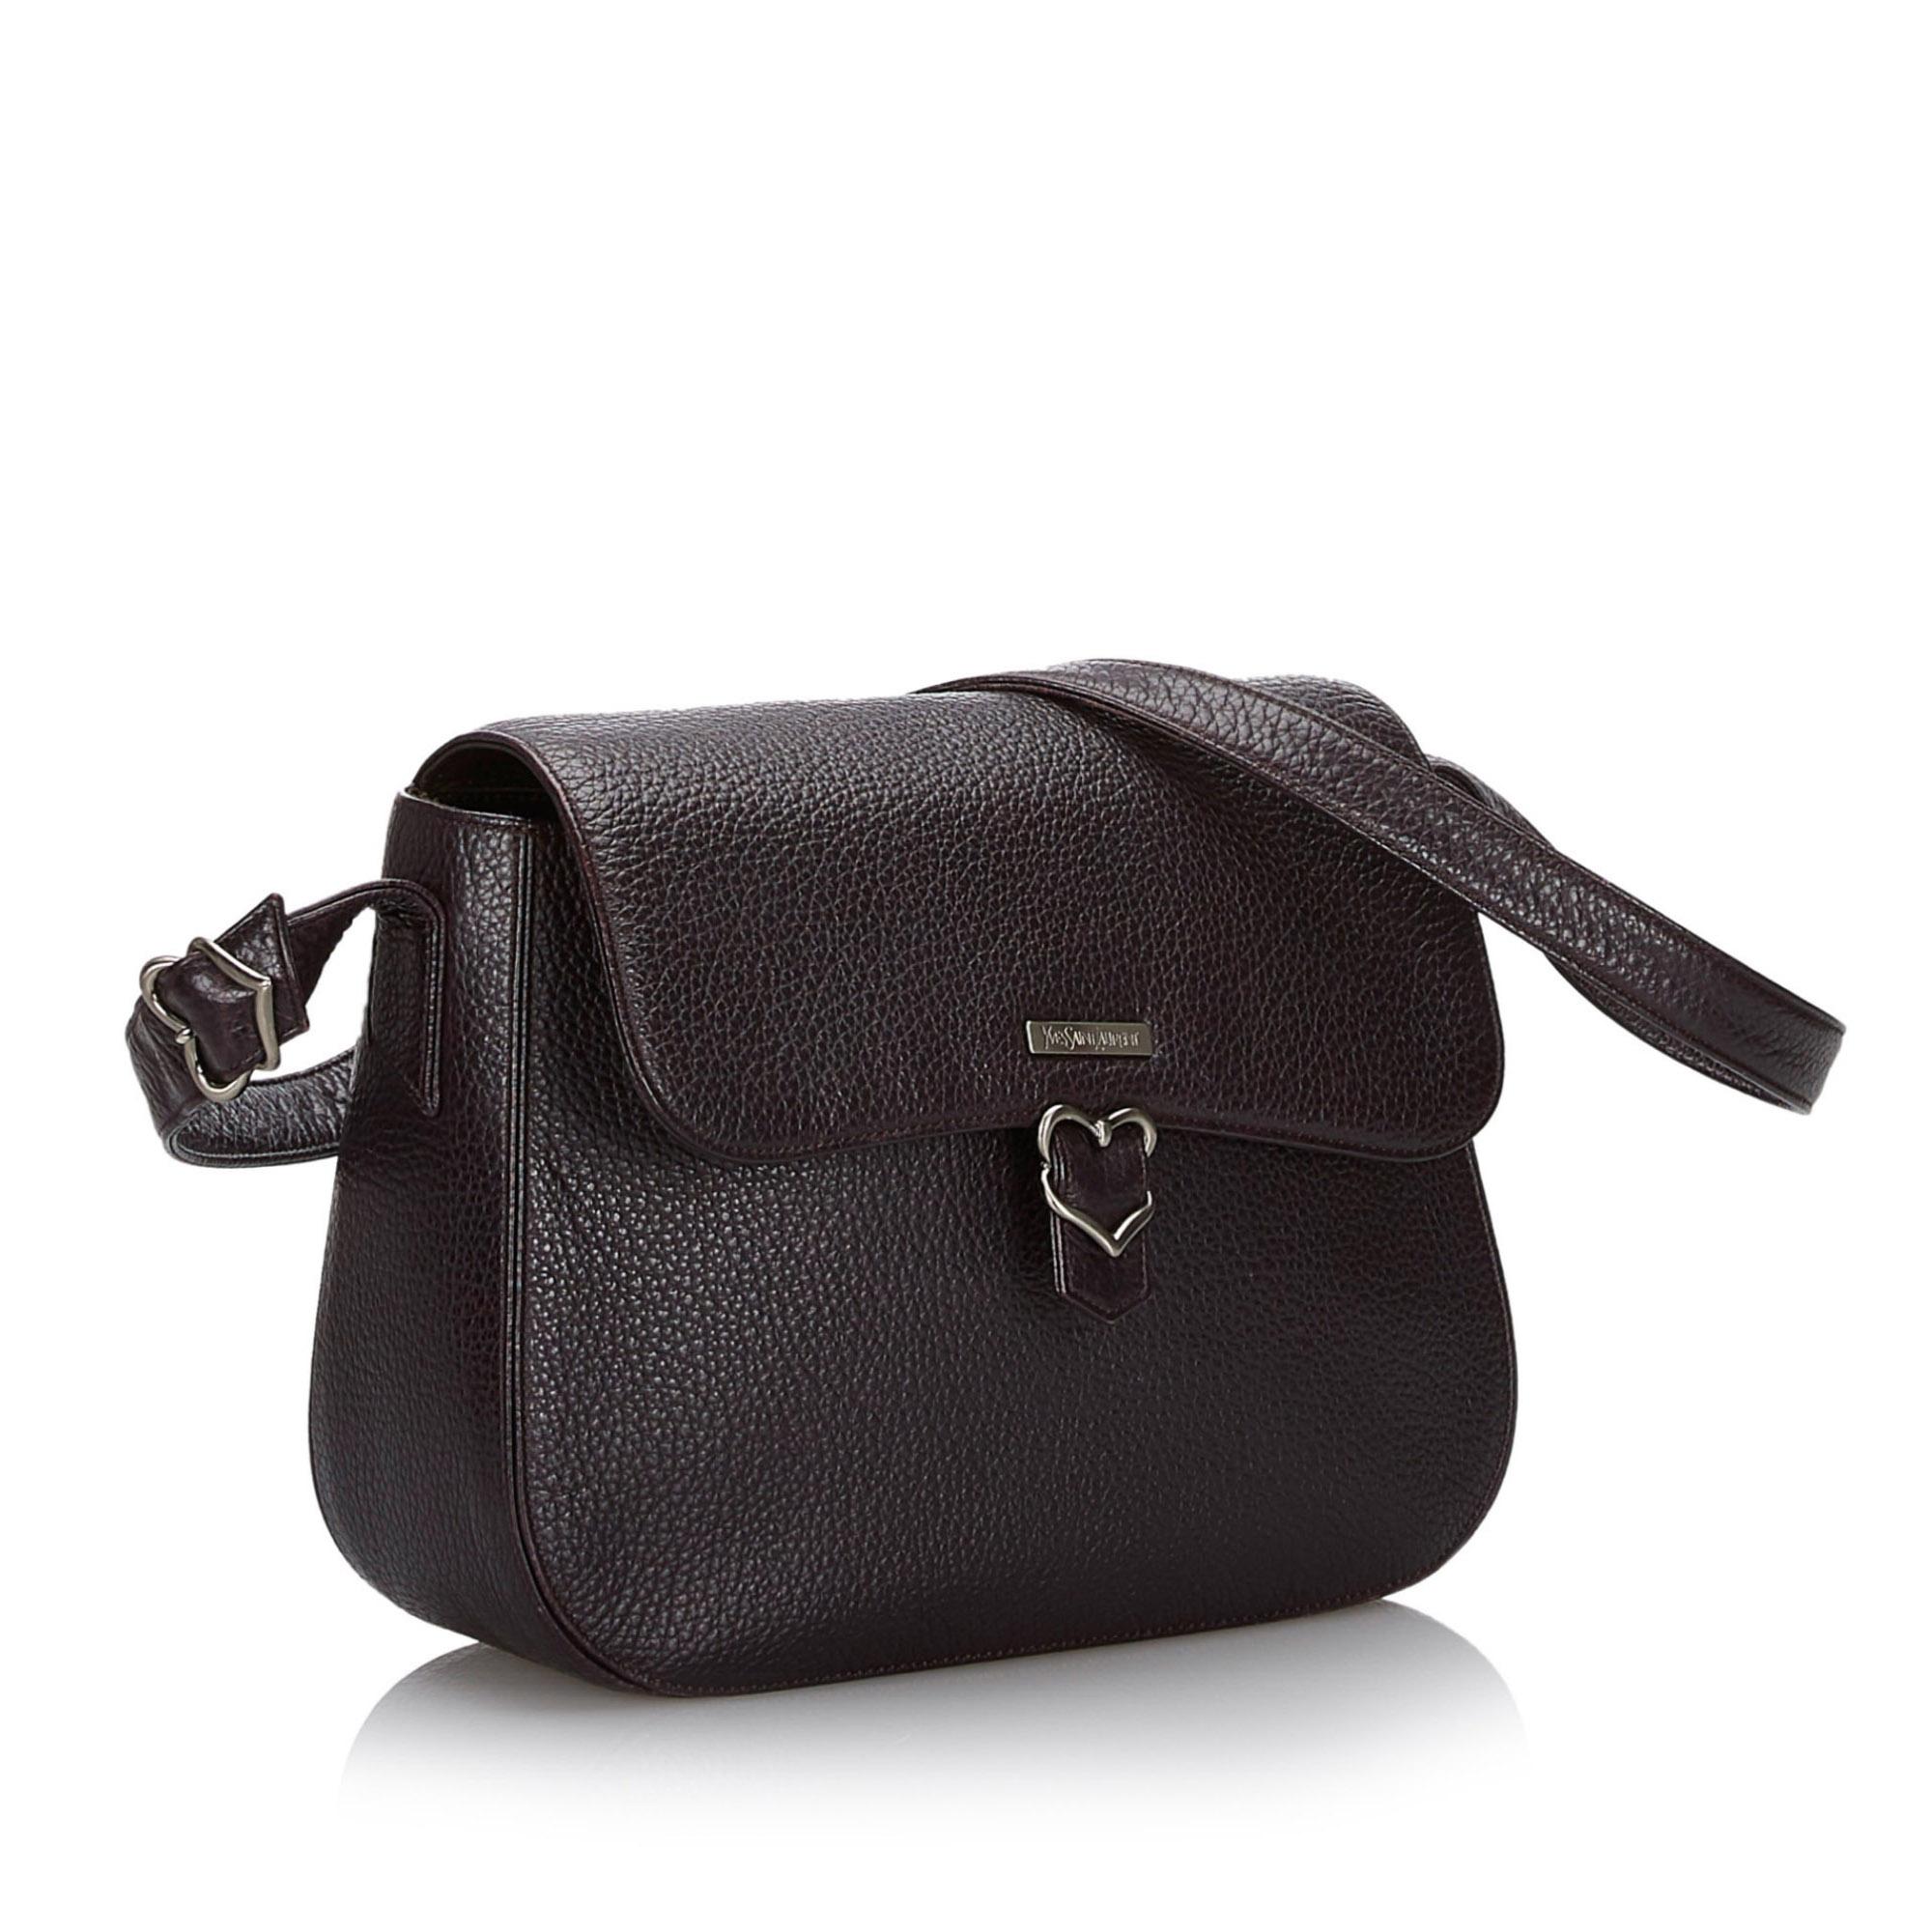 This crossbody bag features a leather body, a flat leather strap, a top flap with a magnetic closure, and interior zip and slip pockets. It carries as B+ condition rating.

Inclusions: 
This item does not come with inclusions.

Dimensions:
Length: